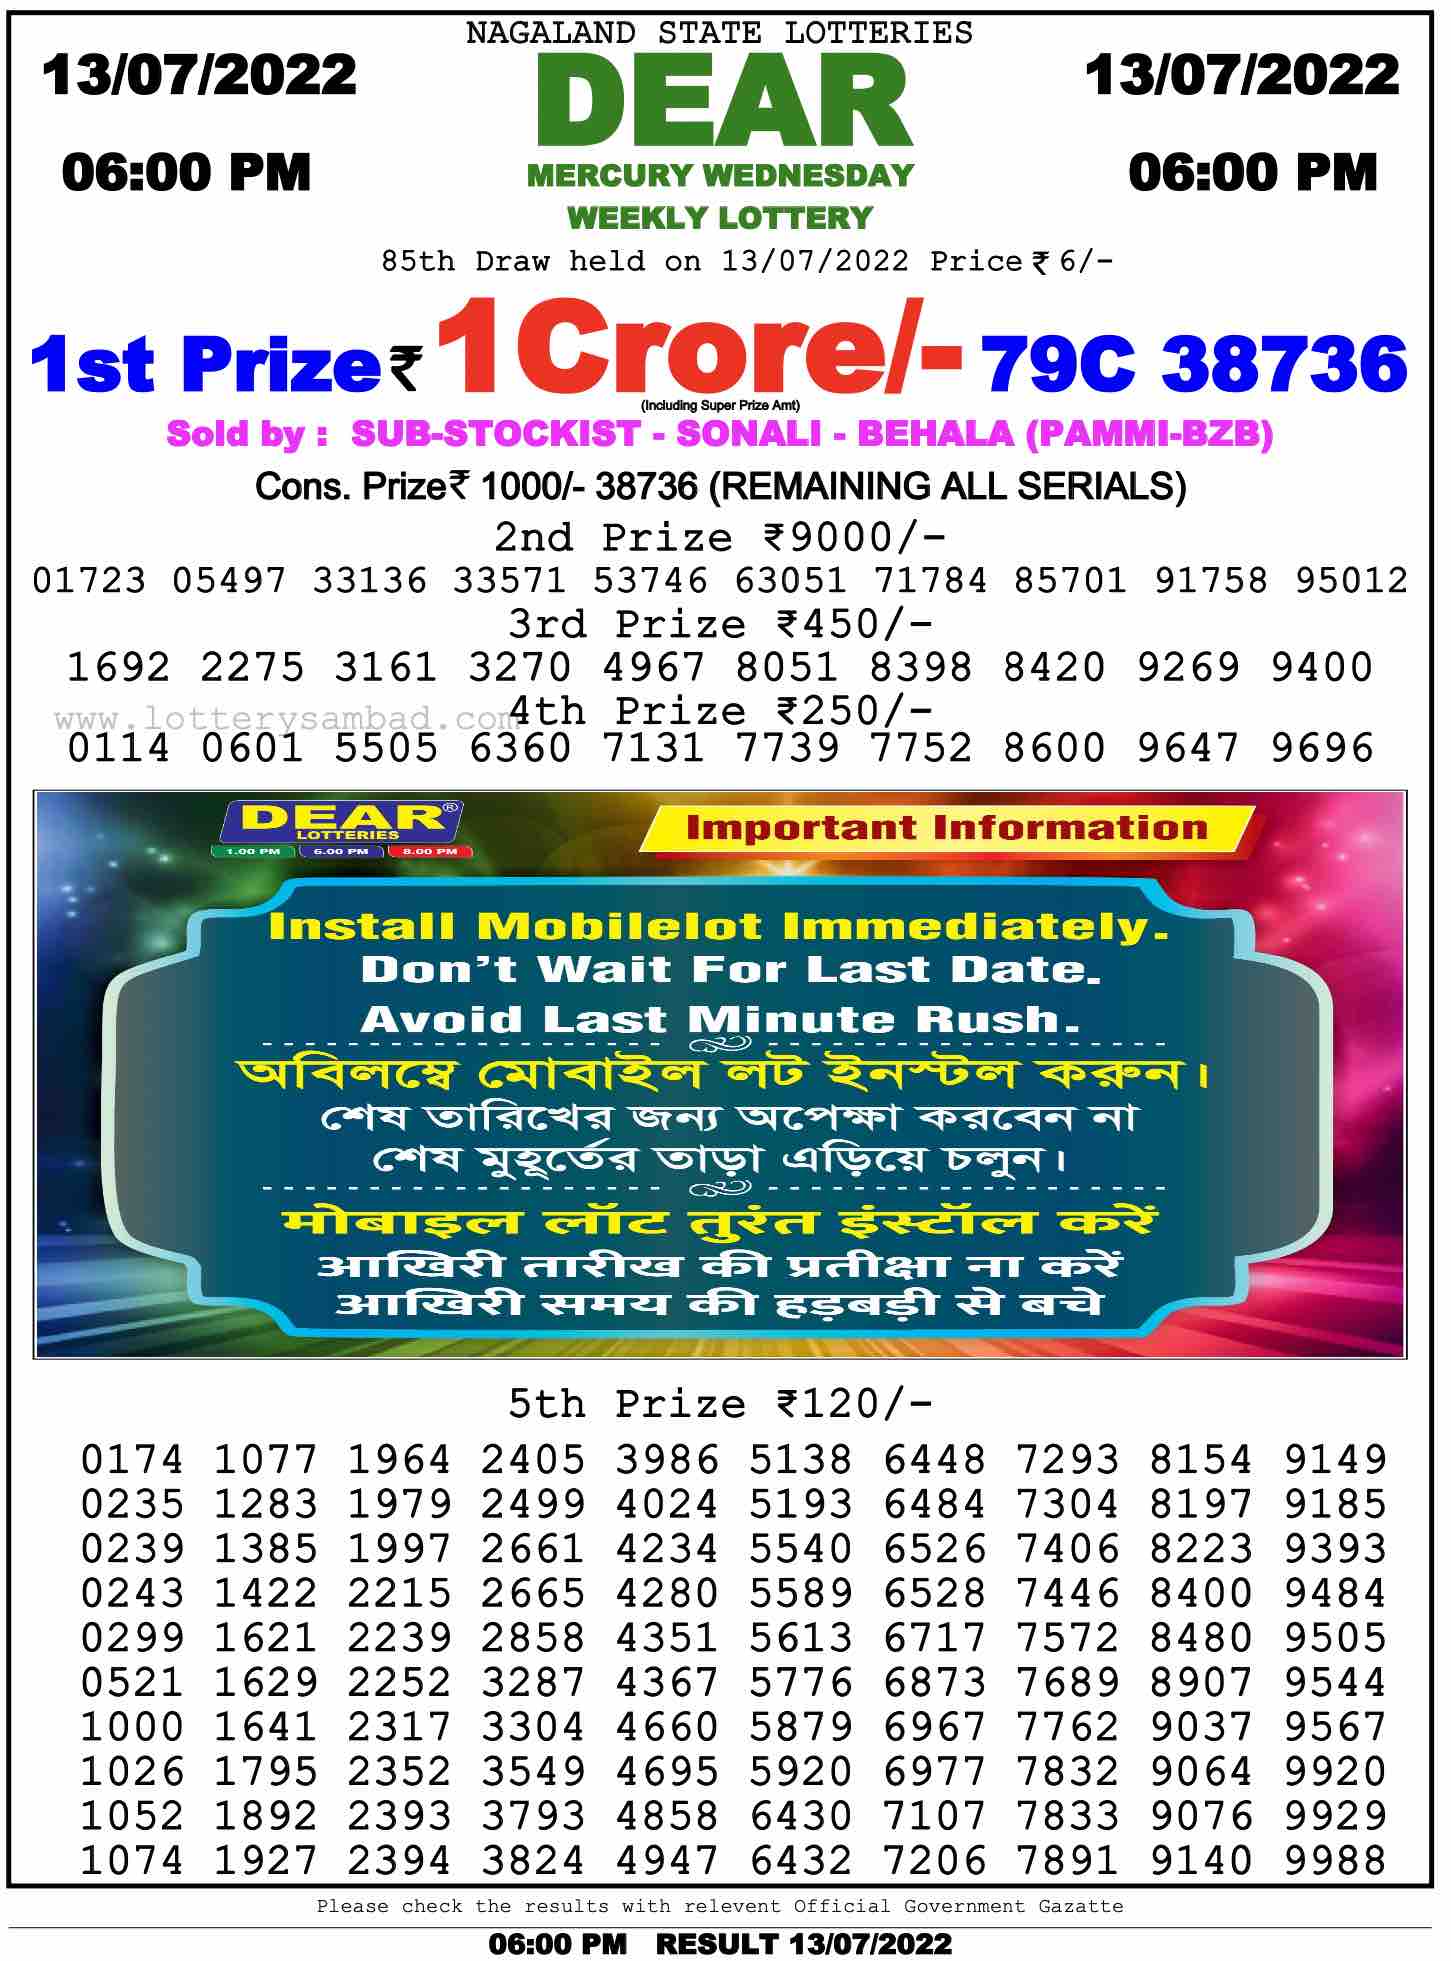 Download Result of Nagaland State Dear 6 Draw 13-07-2022 Draw at 6:00Pm